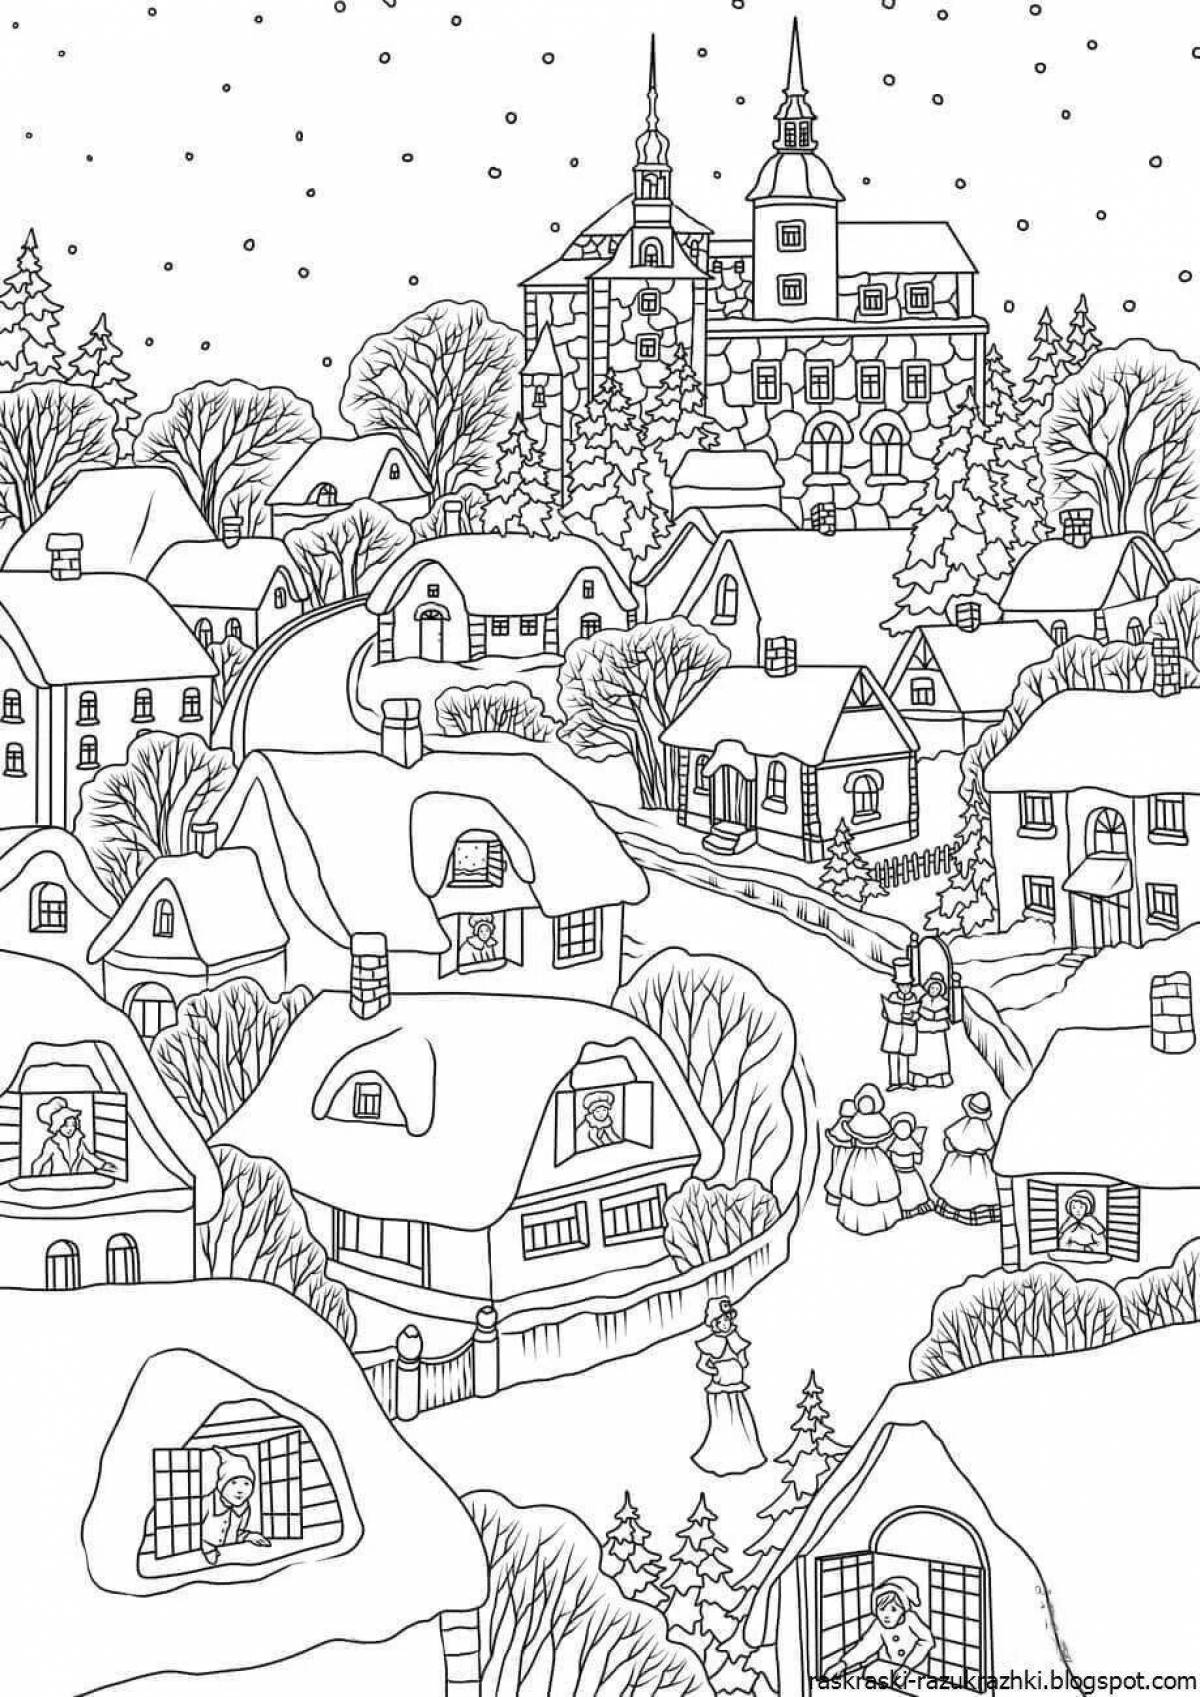 Exquisite winter town coloring book for kids